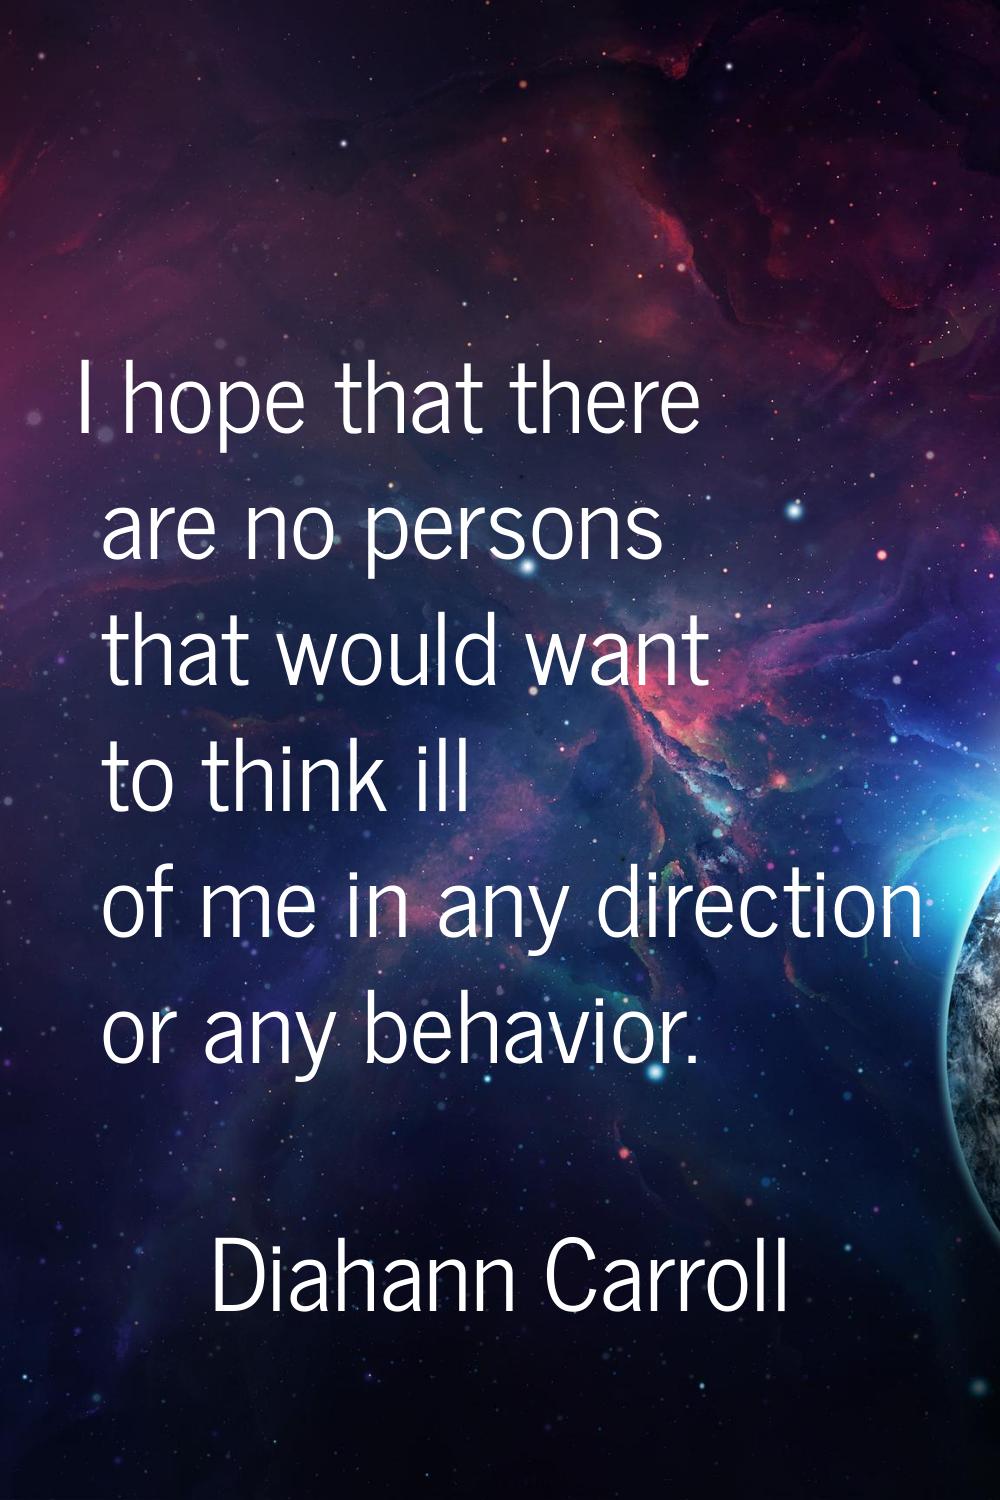 I hope that there are no persons that would want to think ill of me in any direction or any behavio